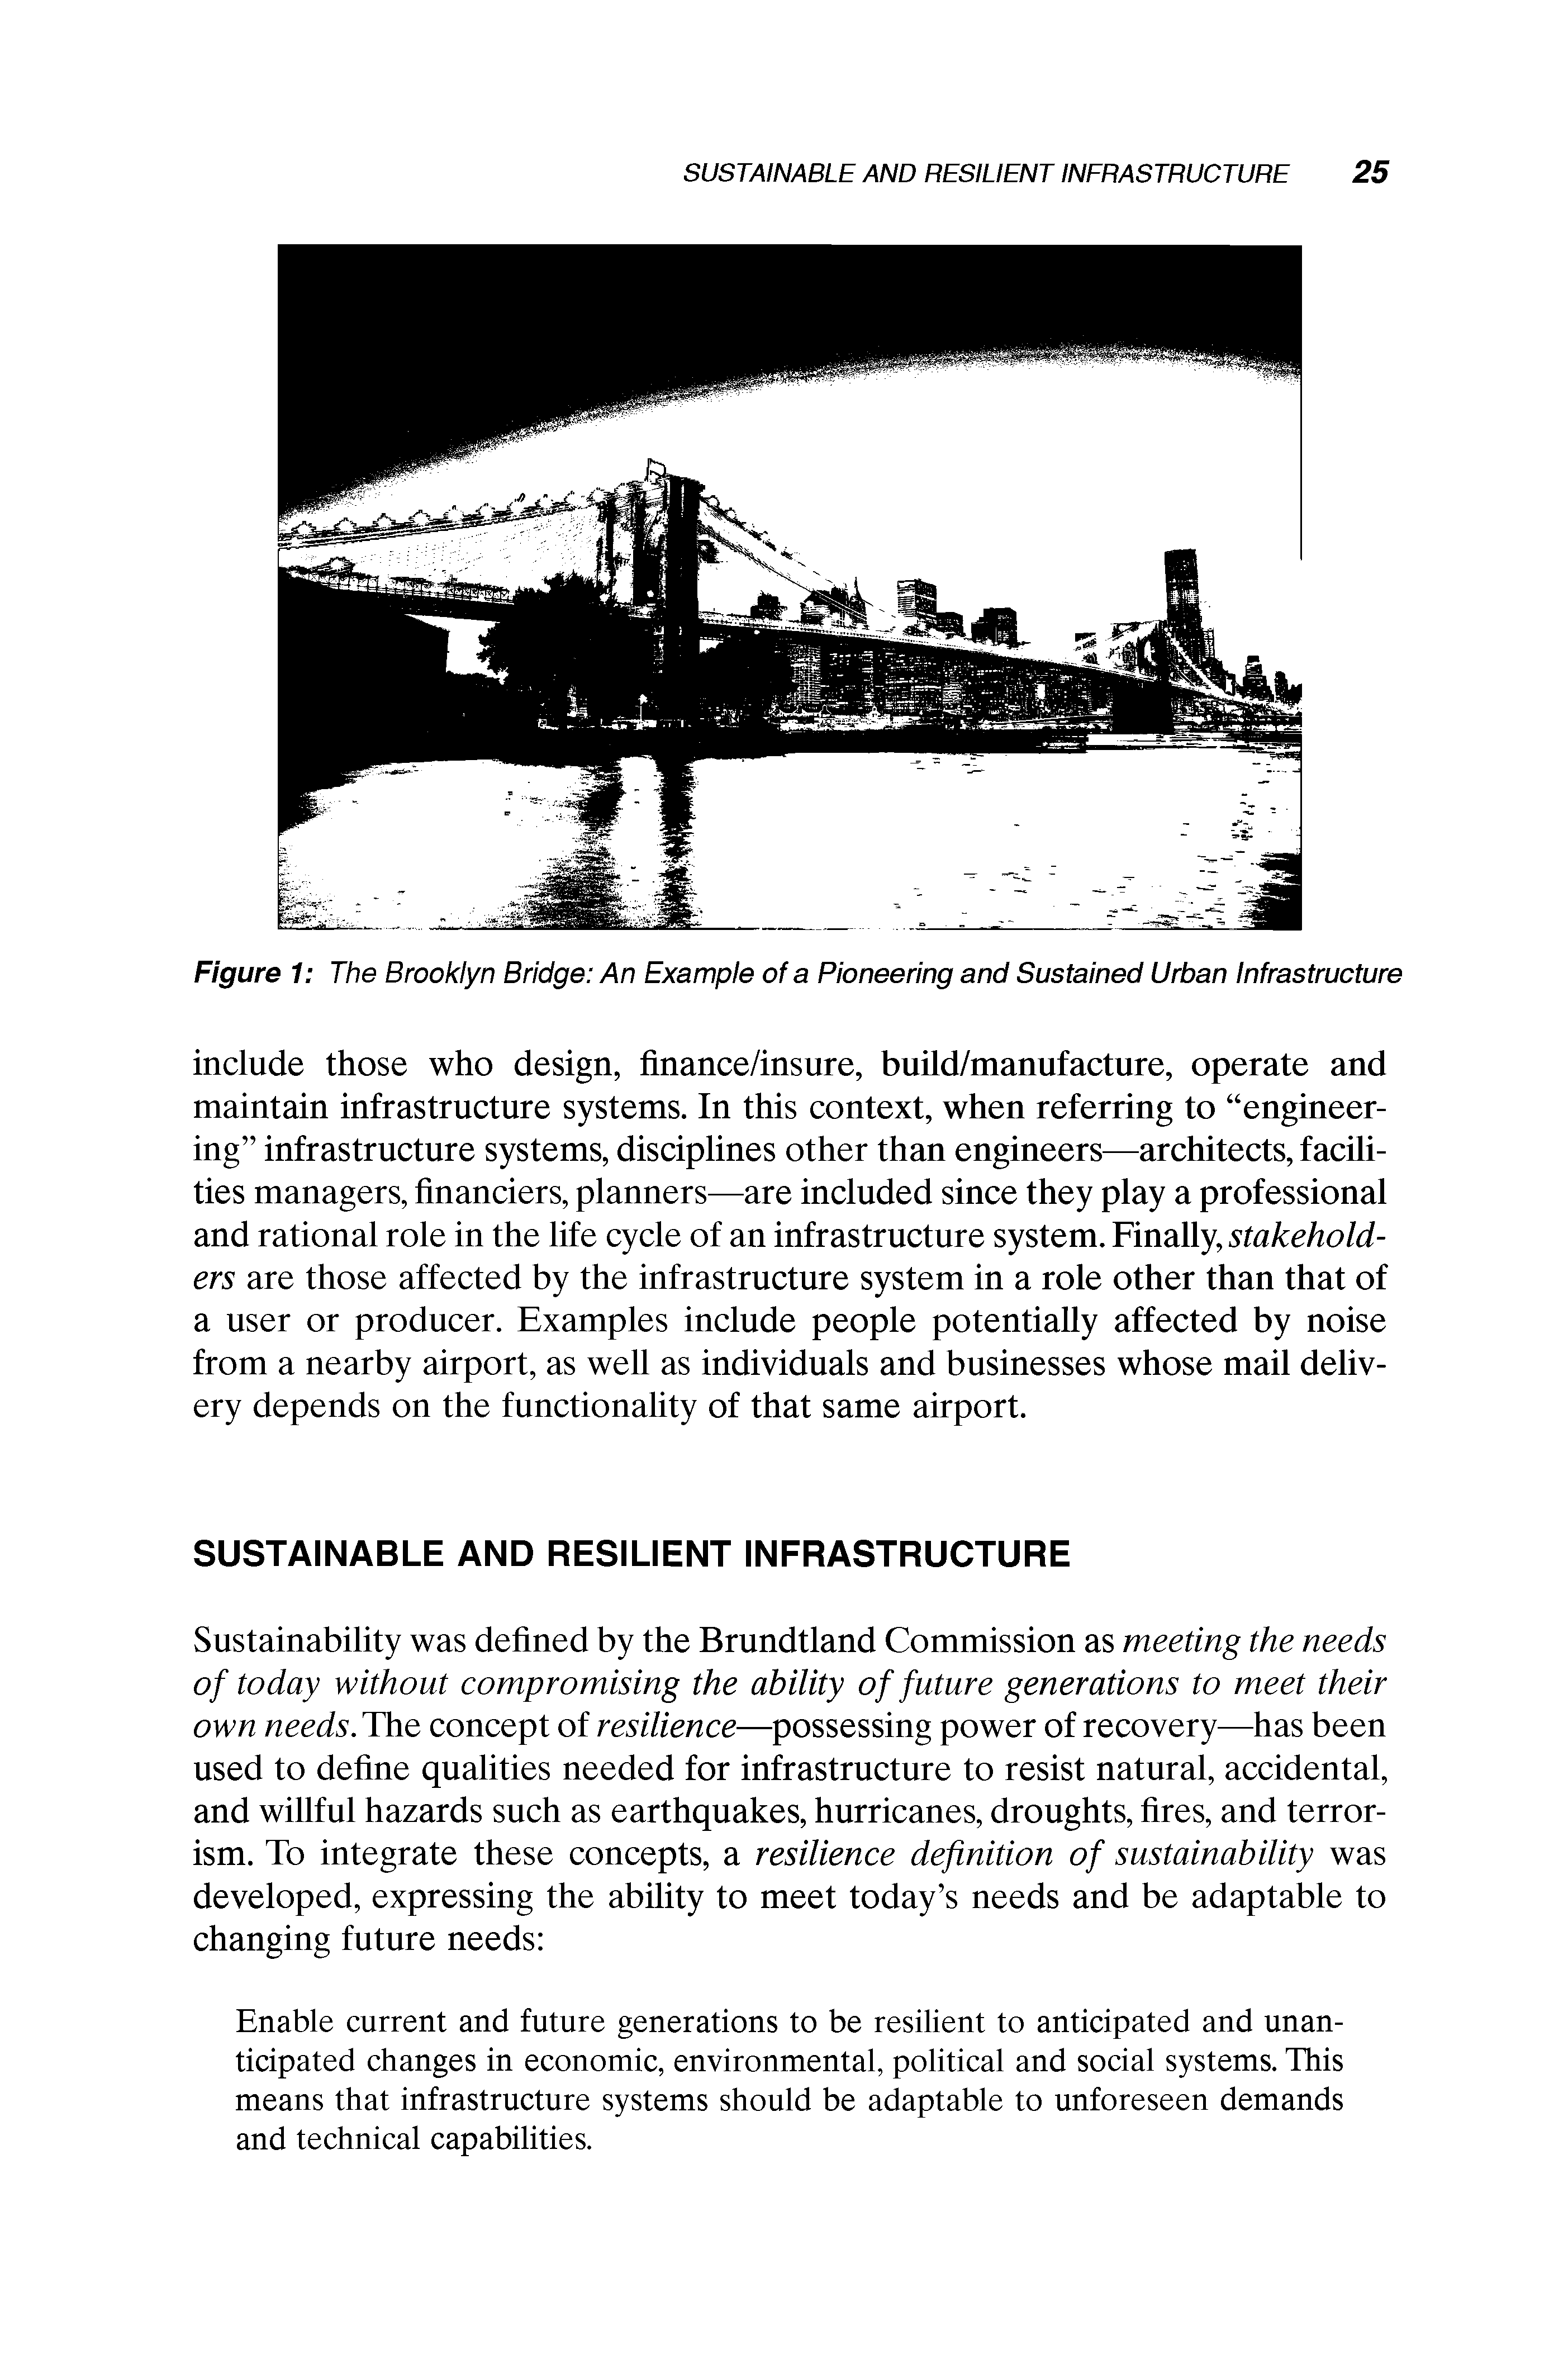 Figure 1 The Brooklyn Bridge An Example of a Pioneering and Sustained Urban Infrastructure...